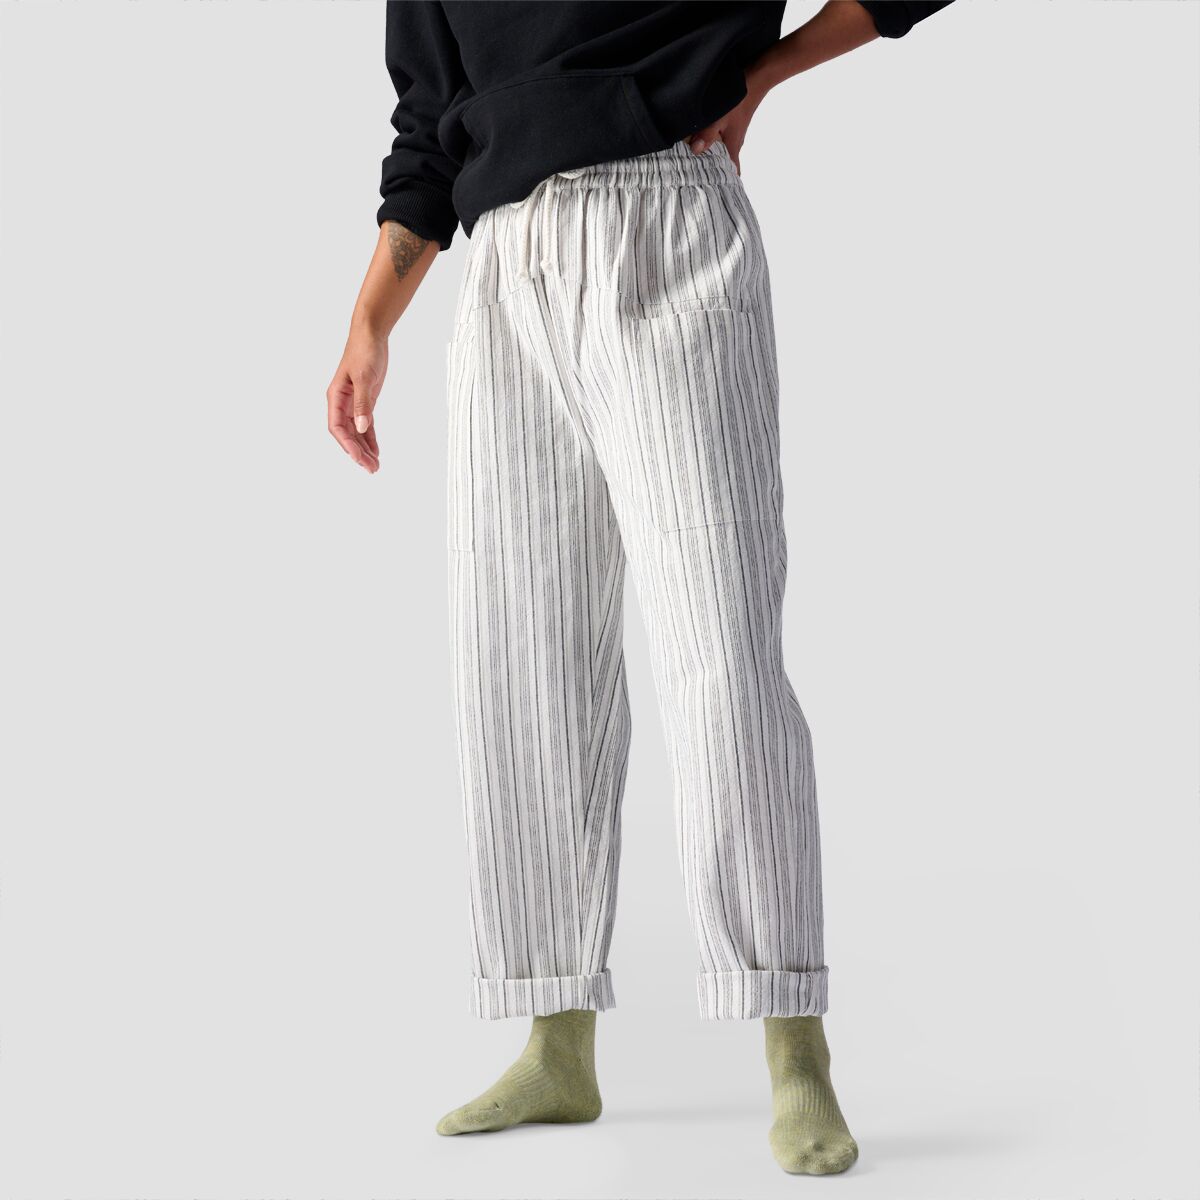 Backcountry Textured Cotton Pull On Pant - Women's